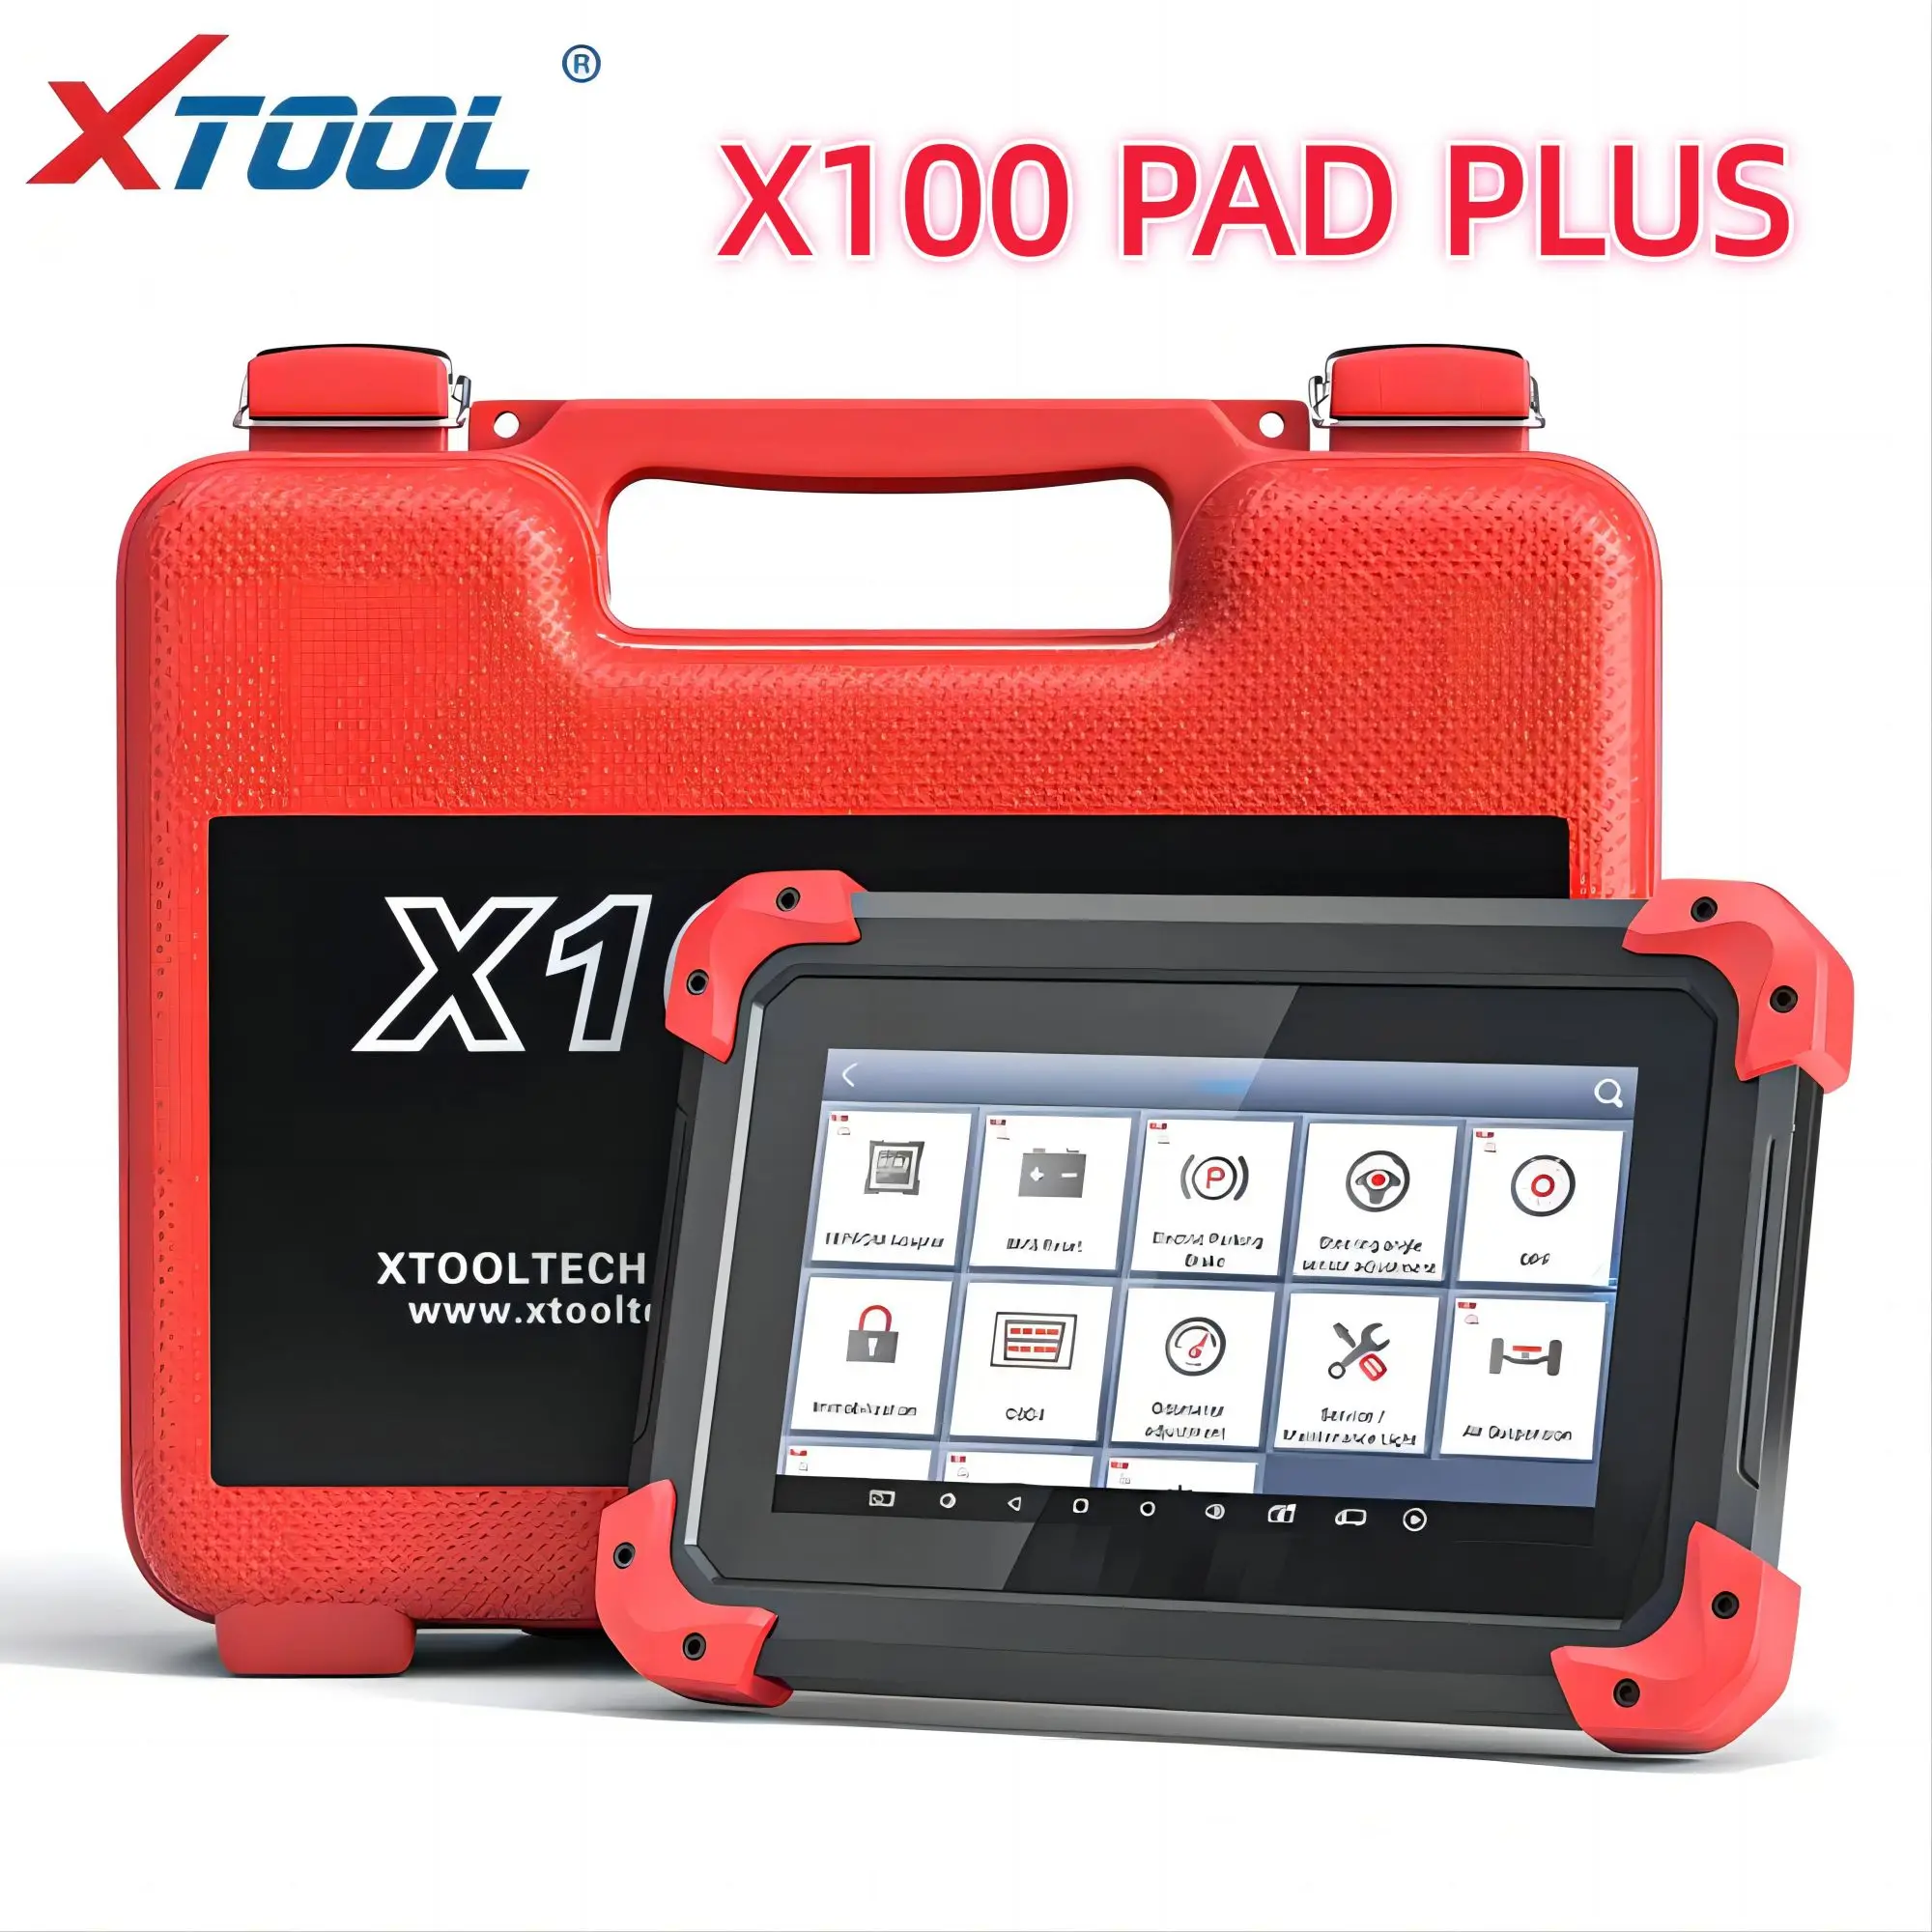 

Xtool X100 PAD Plus Car Key Programer OBD2 Full Systems Diagnostic Scanner Auto Code Reader IMMO EPB DPF BMS 24 Reset Function